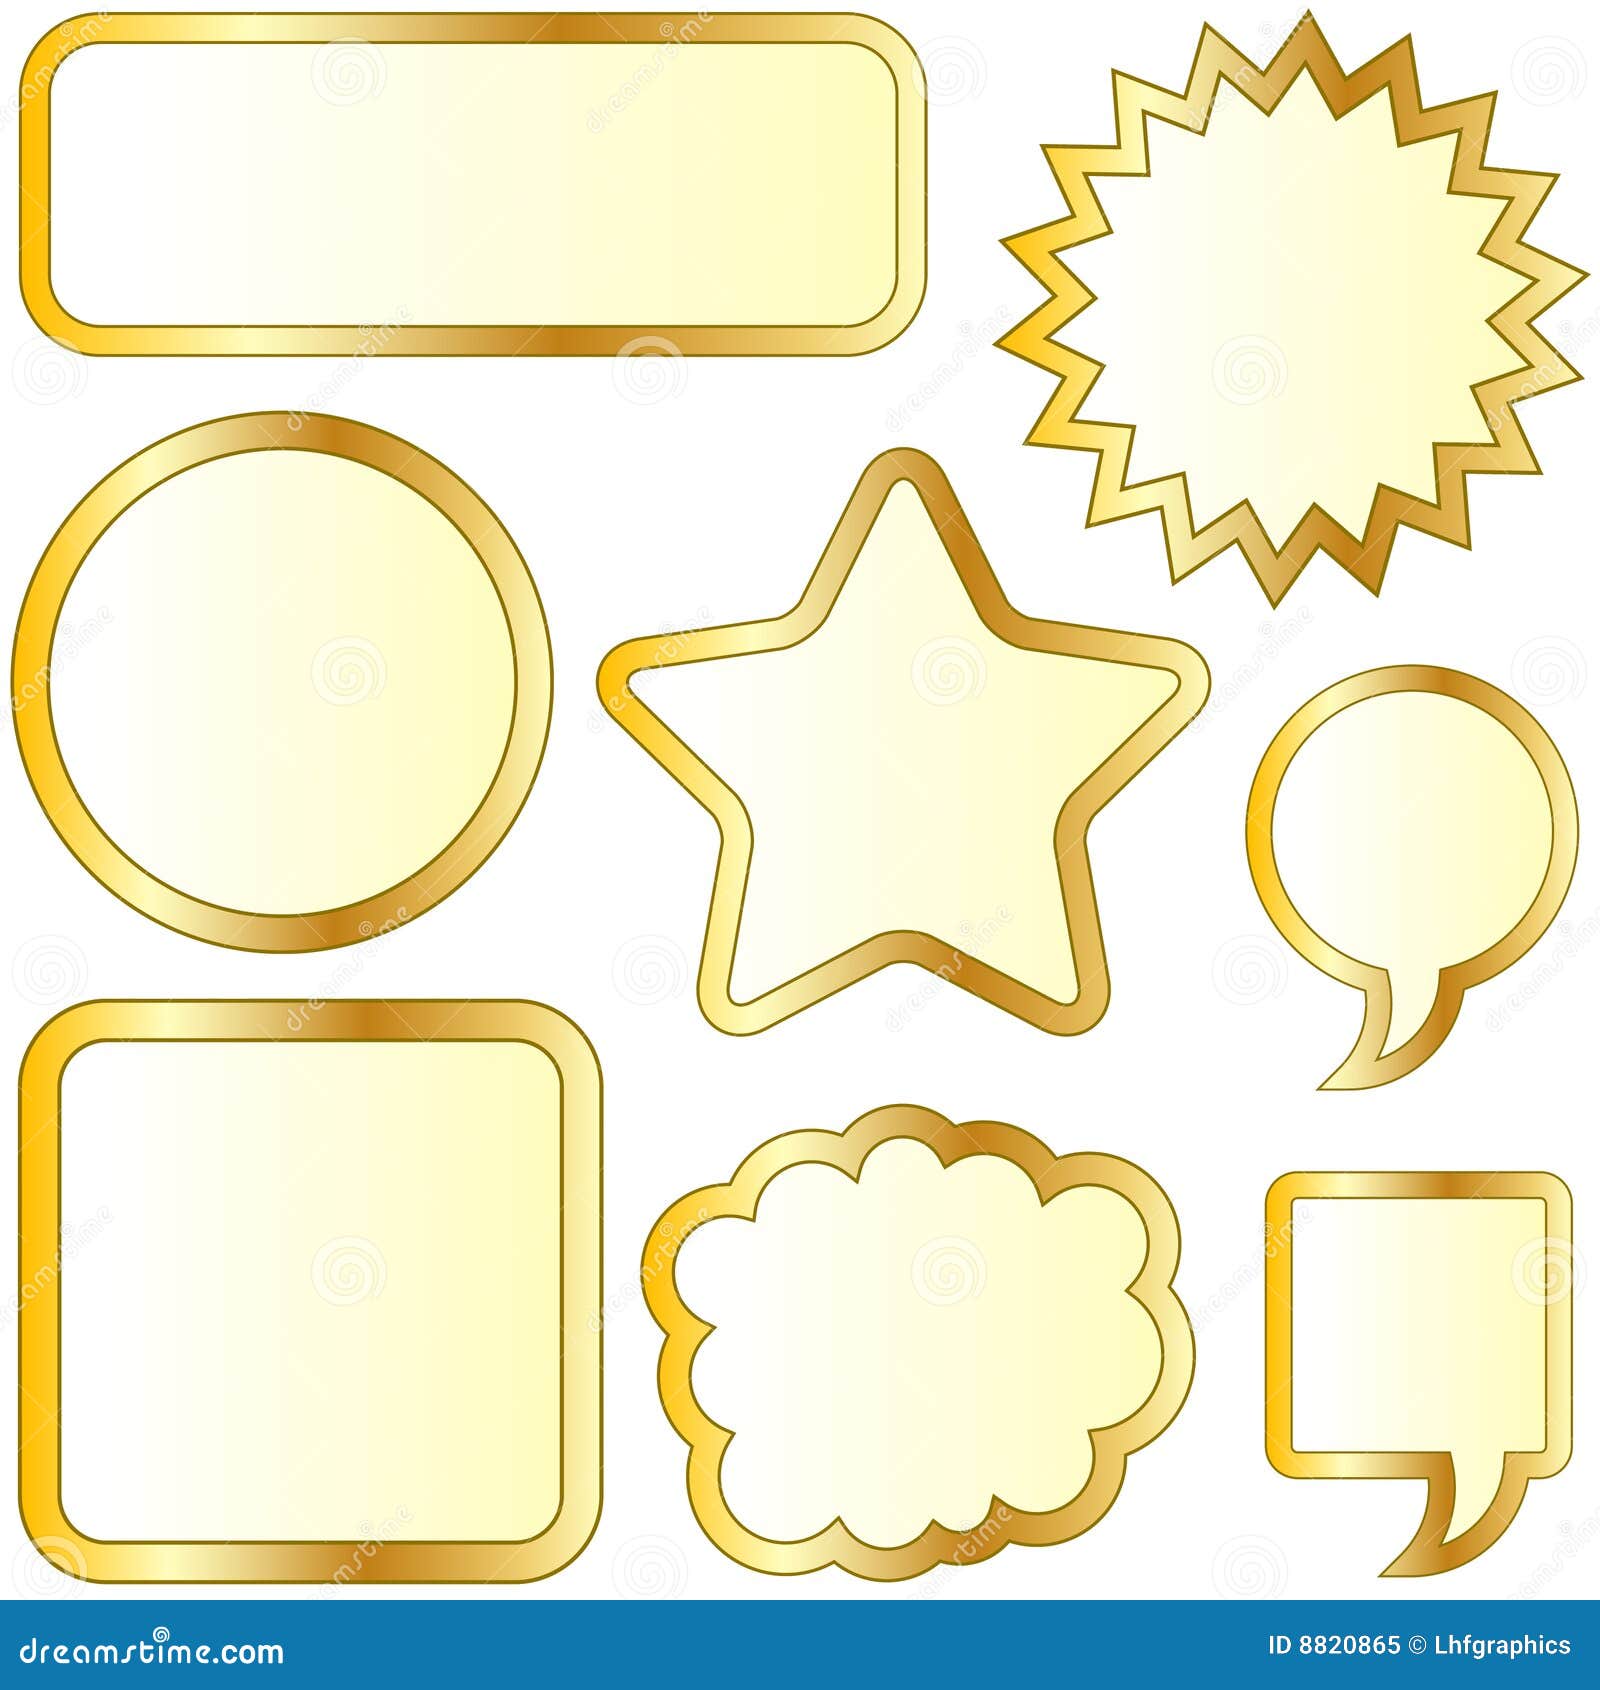 blank gold textured bubble stickers